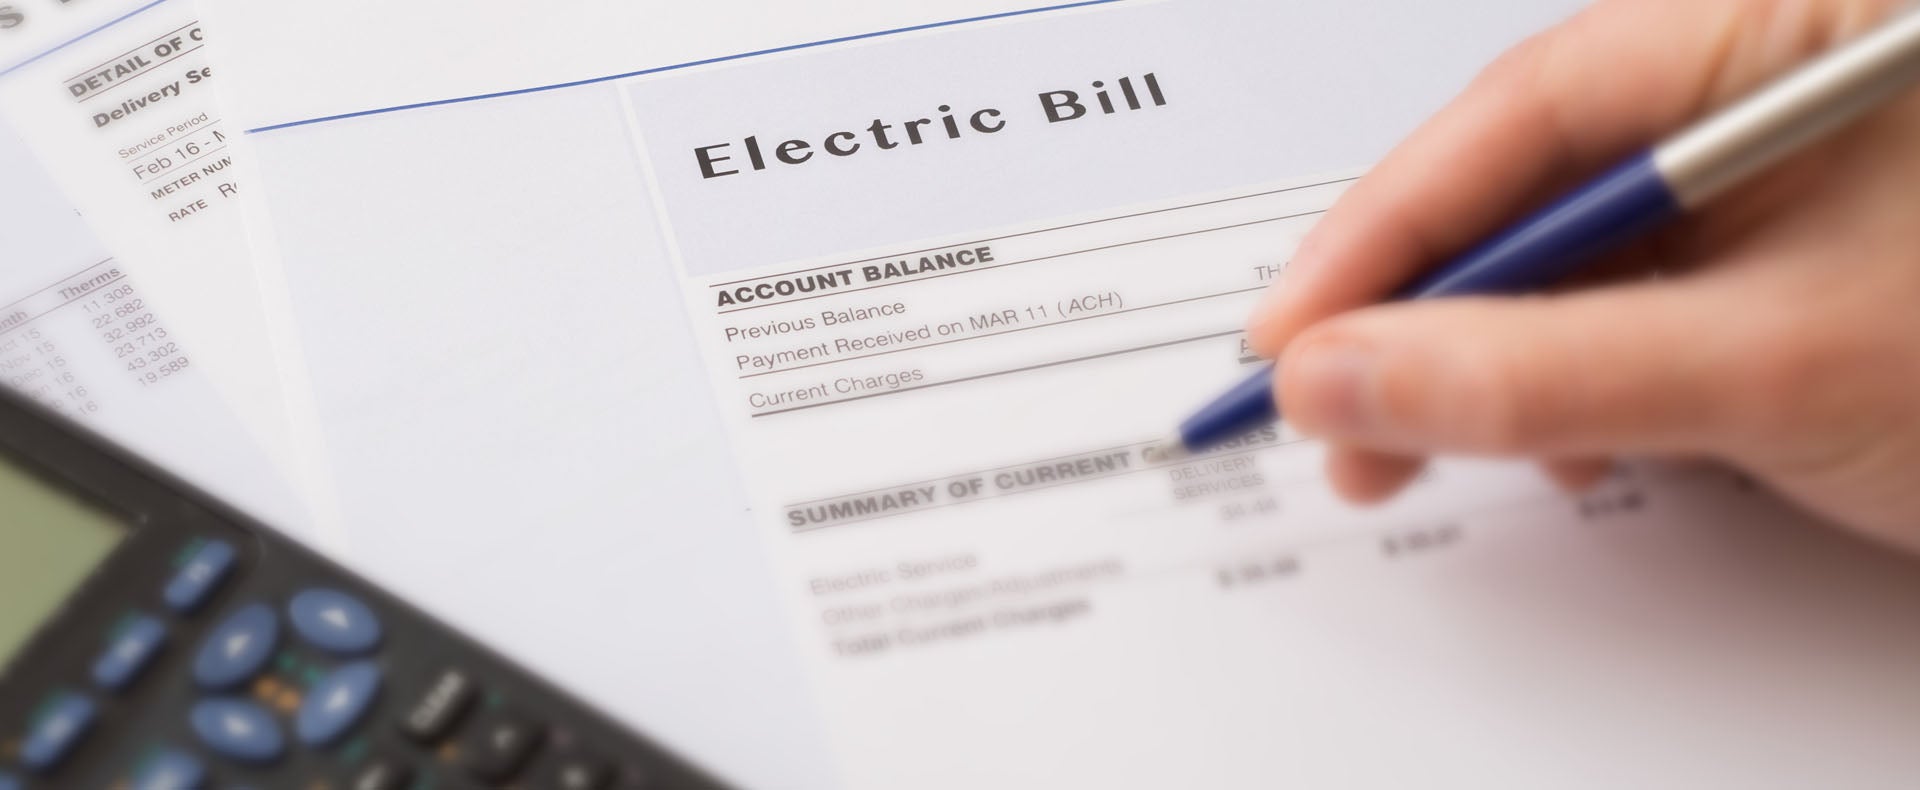 An electric bill with cost information